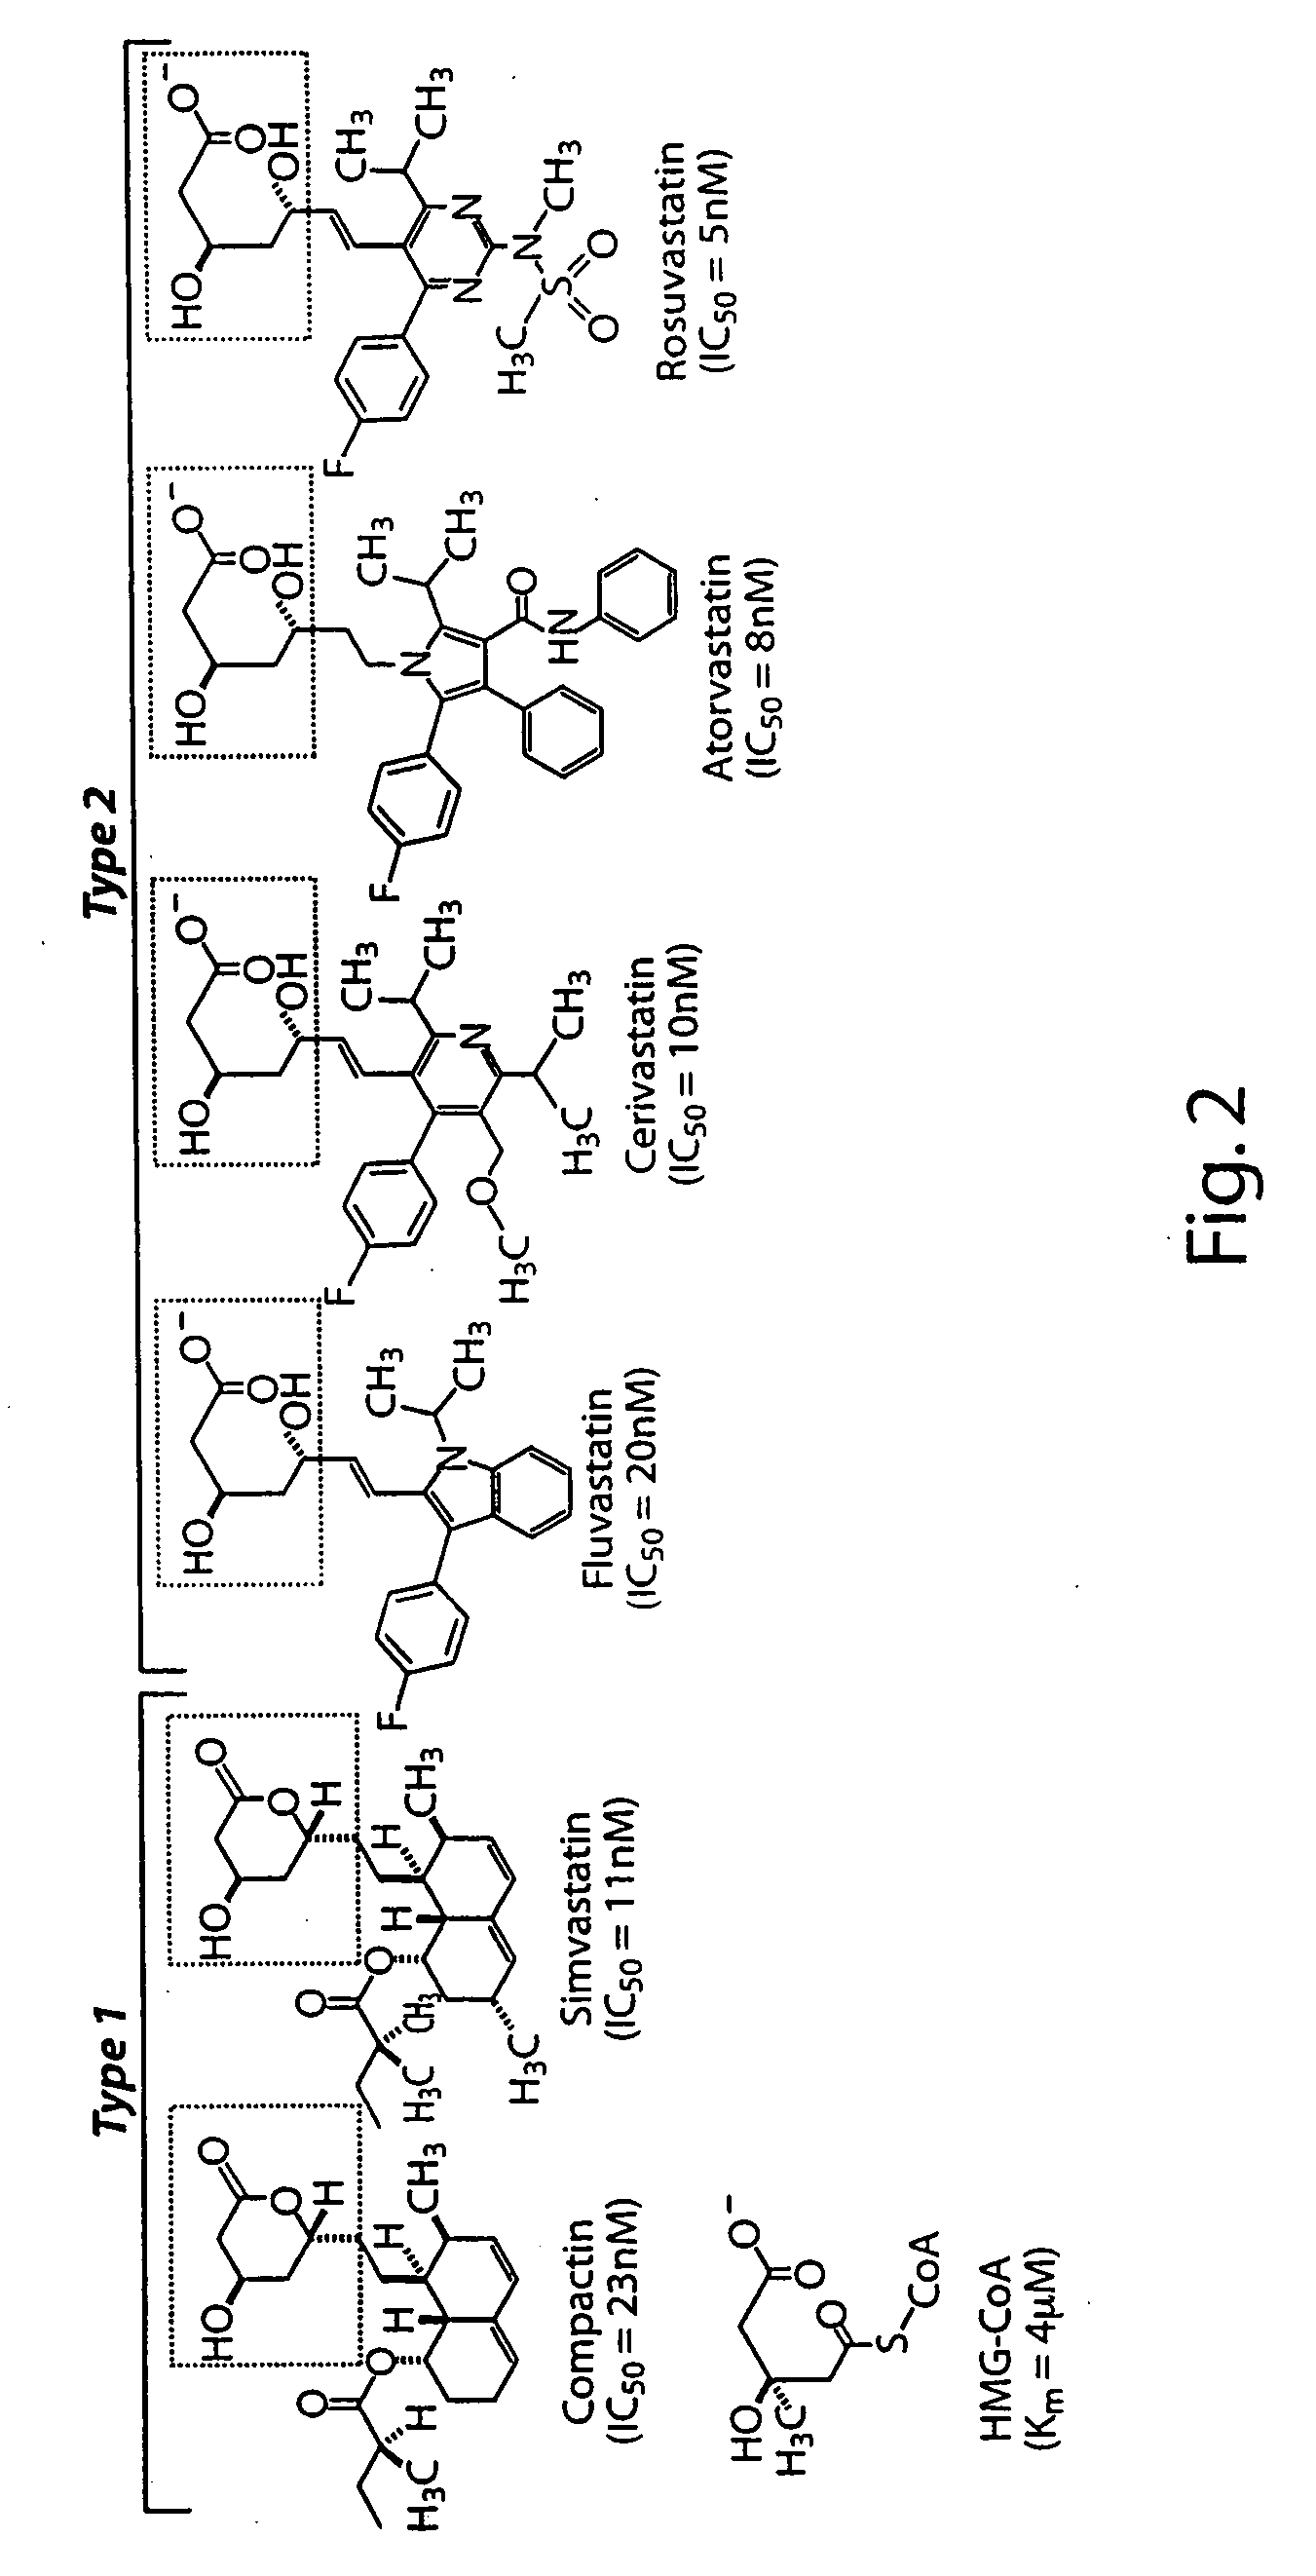 HMGCoA reductase inhibitor-angiotensin converting enzyme inhibitor compounds